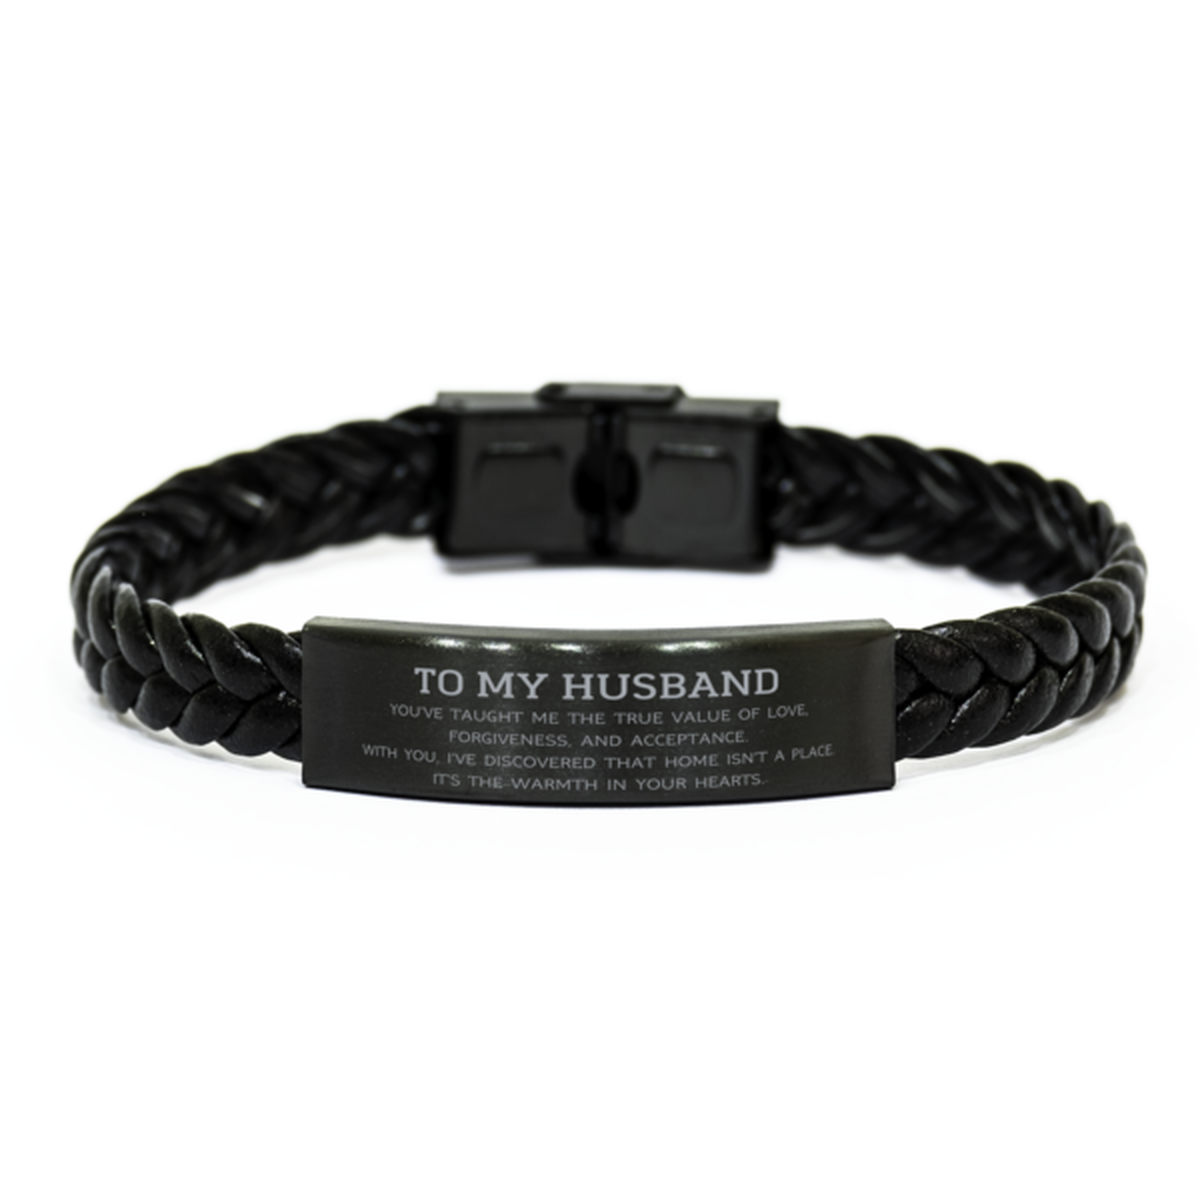 To My Husband Gifts, You've taught me the true value of love, Thank You Gifts For Husband, Birthday Braided Leather Bracelet For Husband